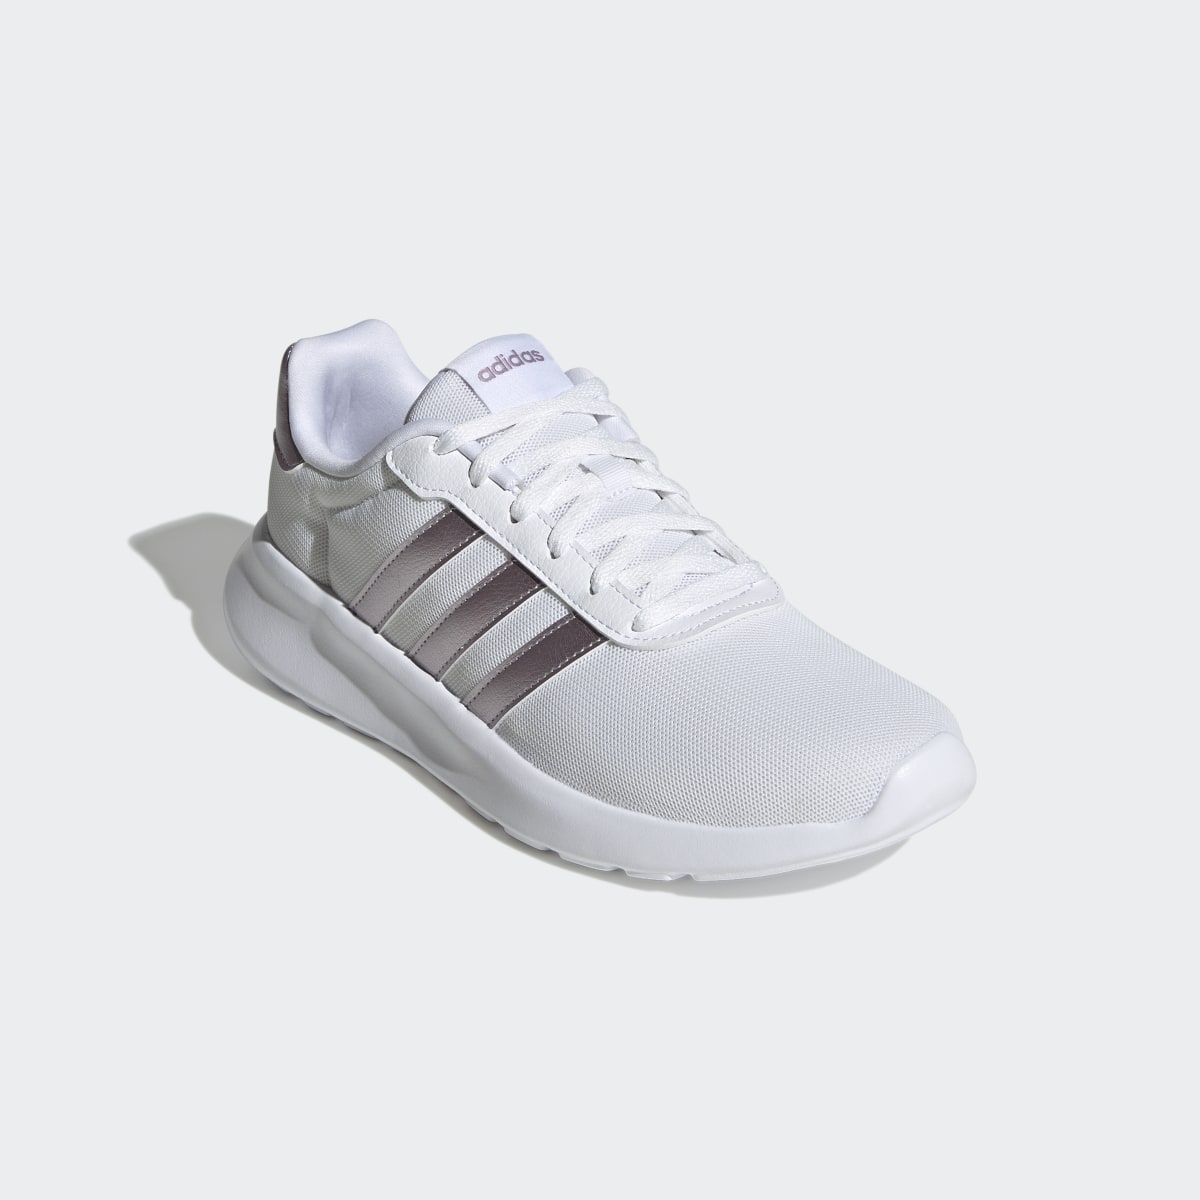 Adidas Lite Racer 3.0 Shoes. 5